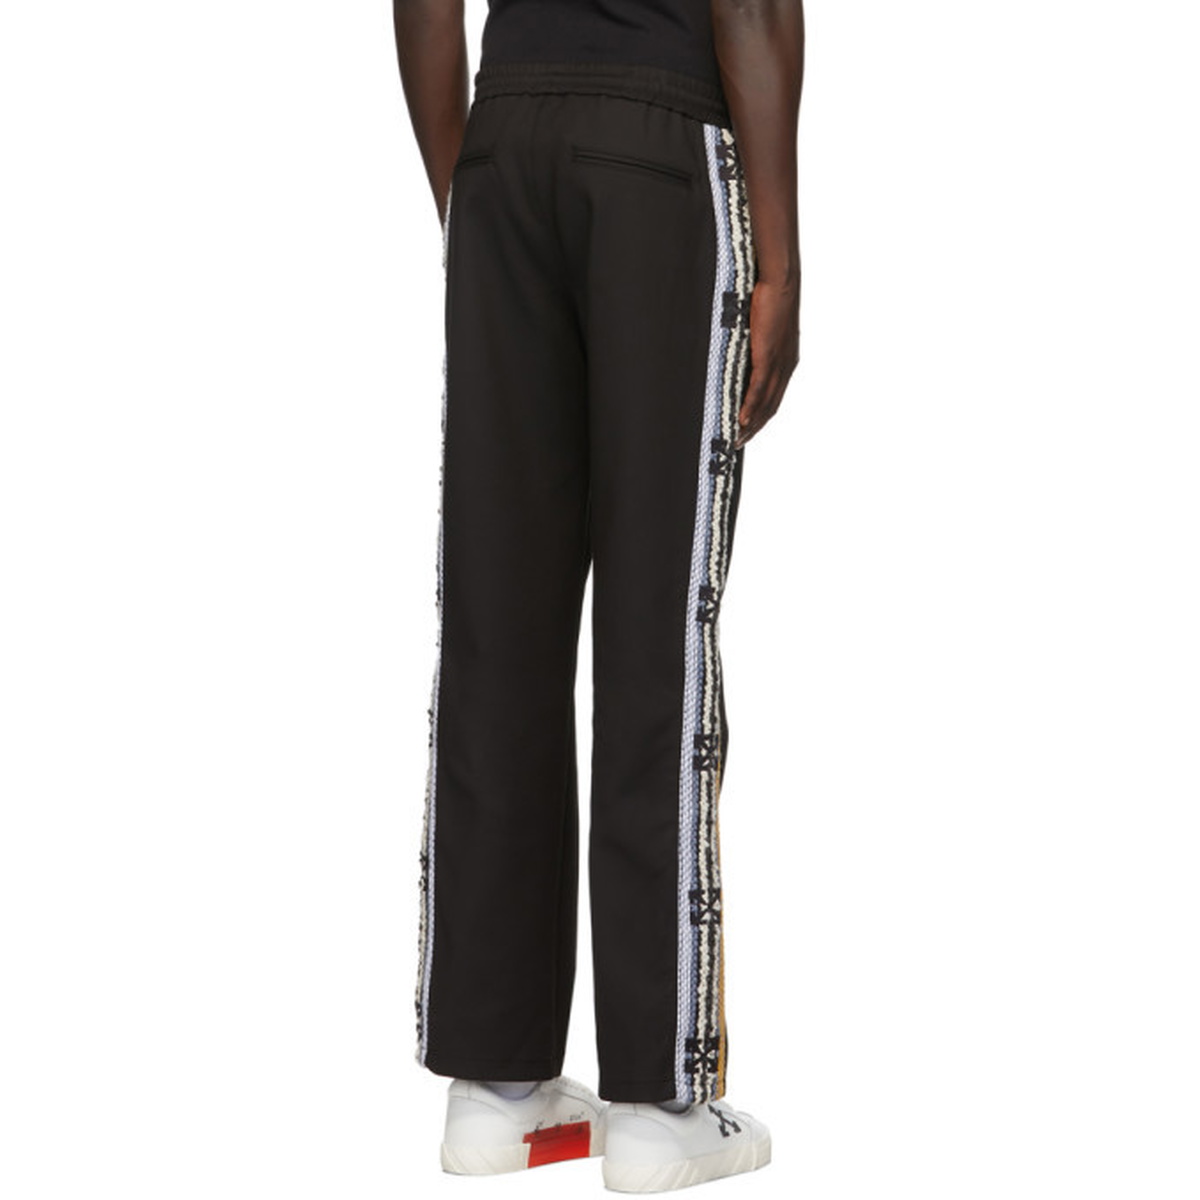 Off White And Black Mens Slim Fit Track Pant at Best Price in New Delhi |  Miraya